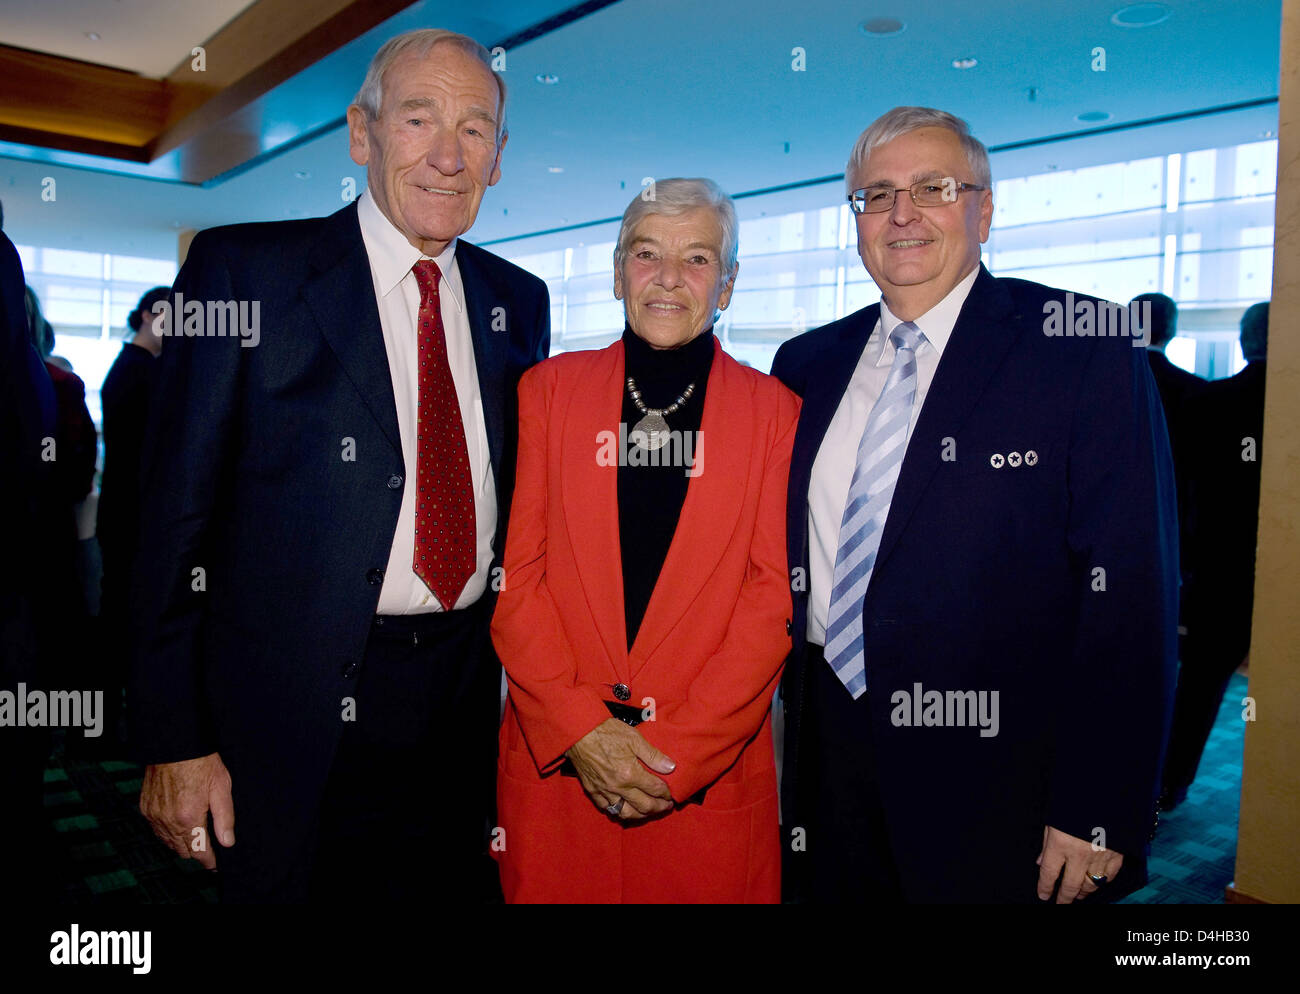 German goalie legend Bernd Trautmann (L), his wife Marlis and President of the German Football Association (DFB) Theo Zwaniziger smile during a reception of  in his honour in Berlin, Germany, 19 November 2008. Trautmann was the first-ever German to play in English Premier League in 1949. The 85-year-old played for Manchester City and is regarded one of England?s best goalkeepers as Stock Photo